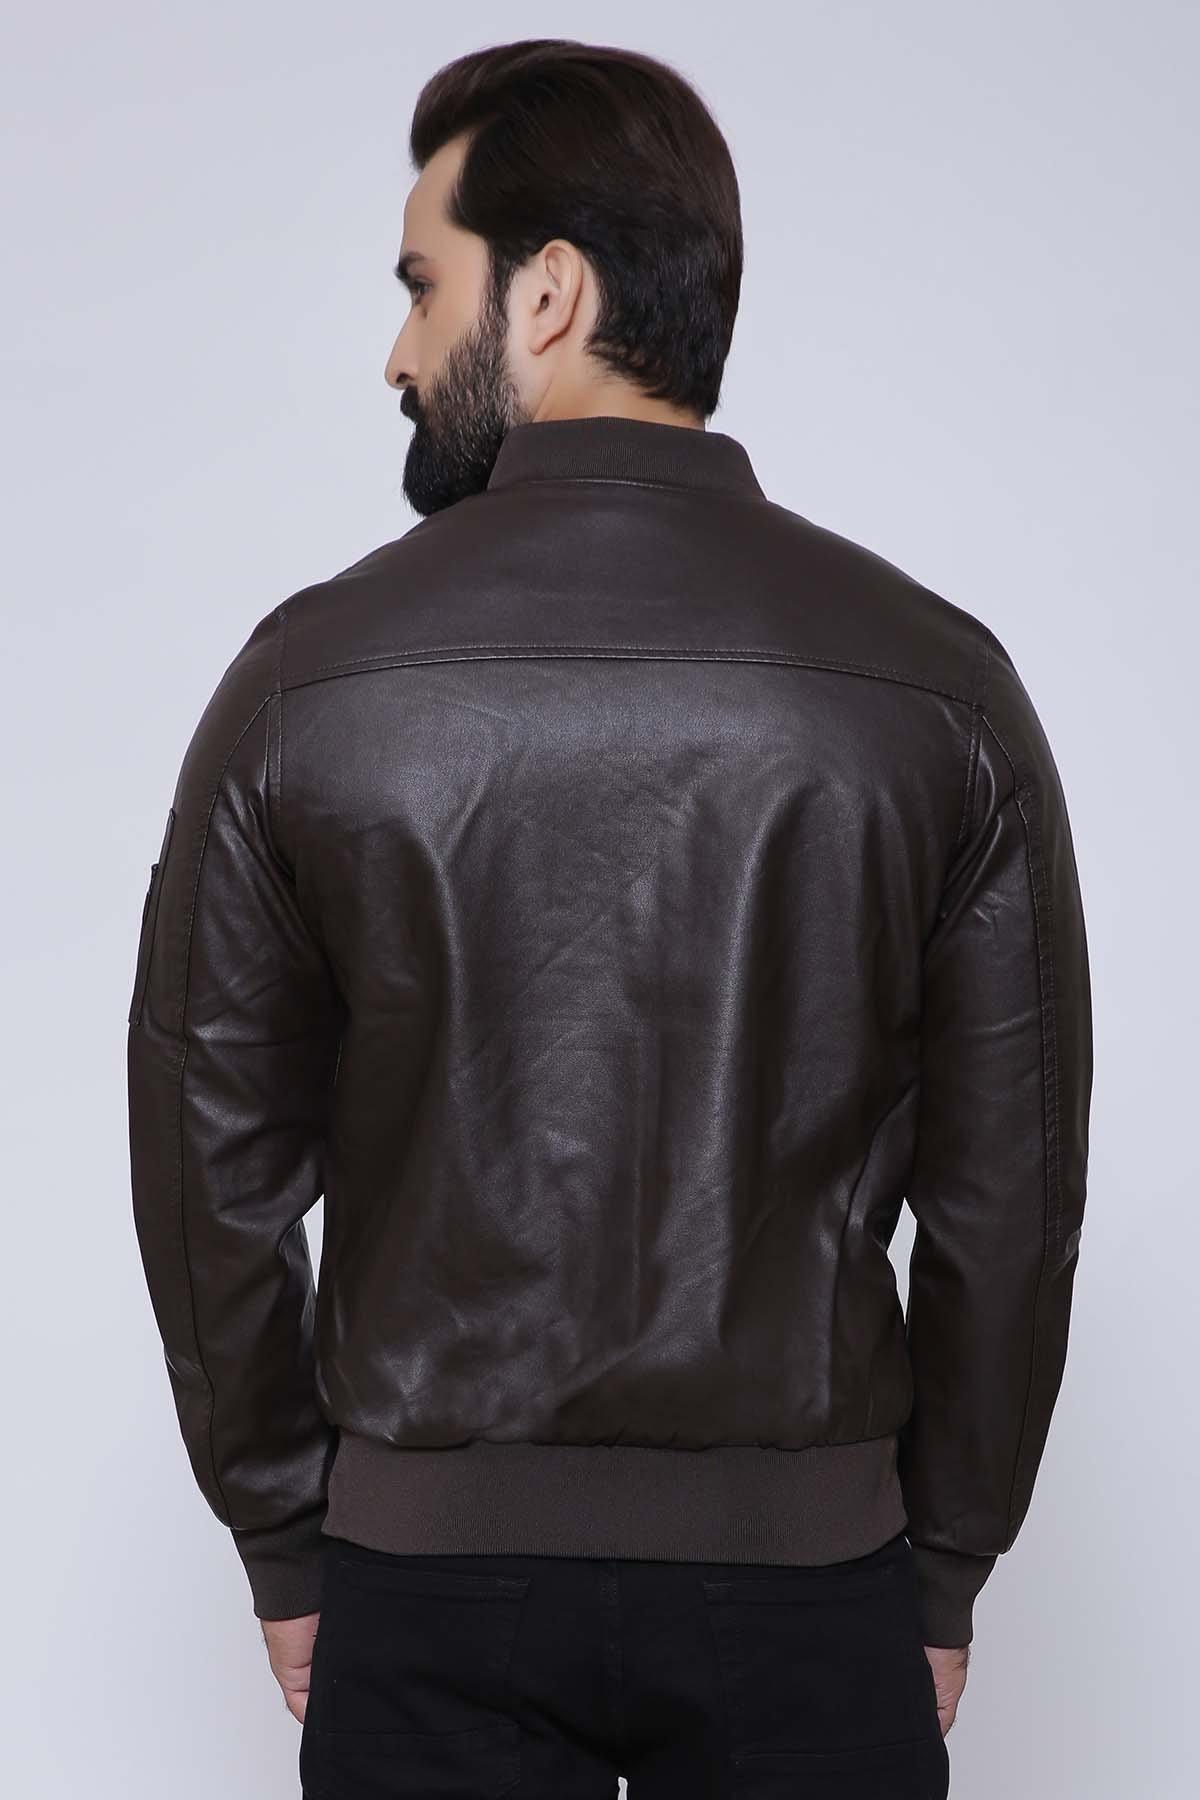 JACKET FULL SLEEVE BROWN at Charcoal Clothing